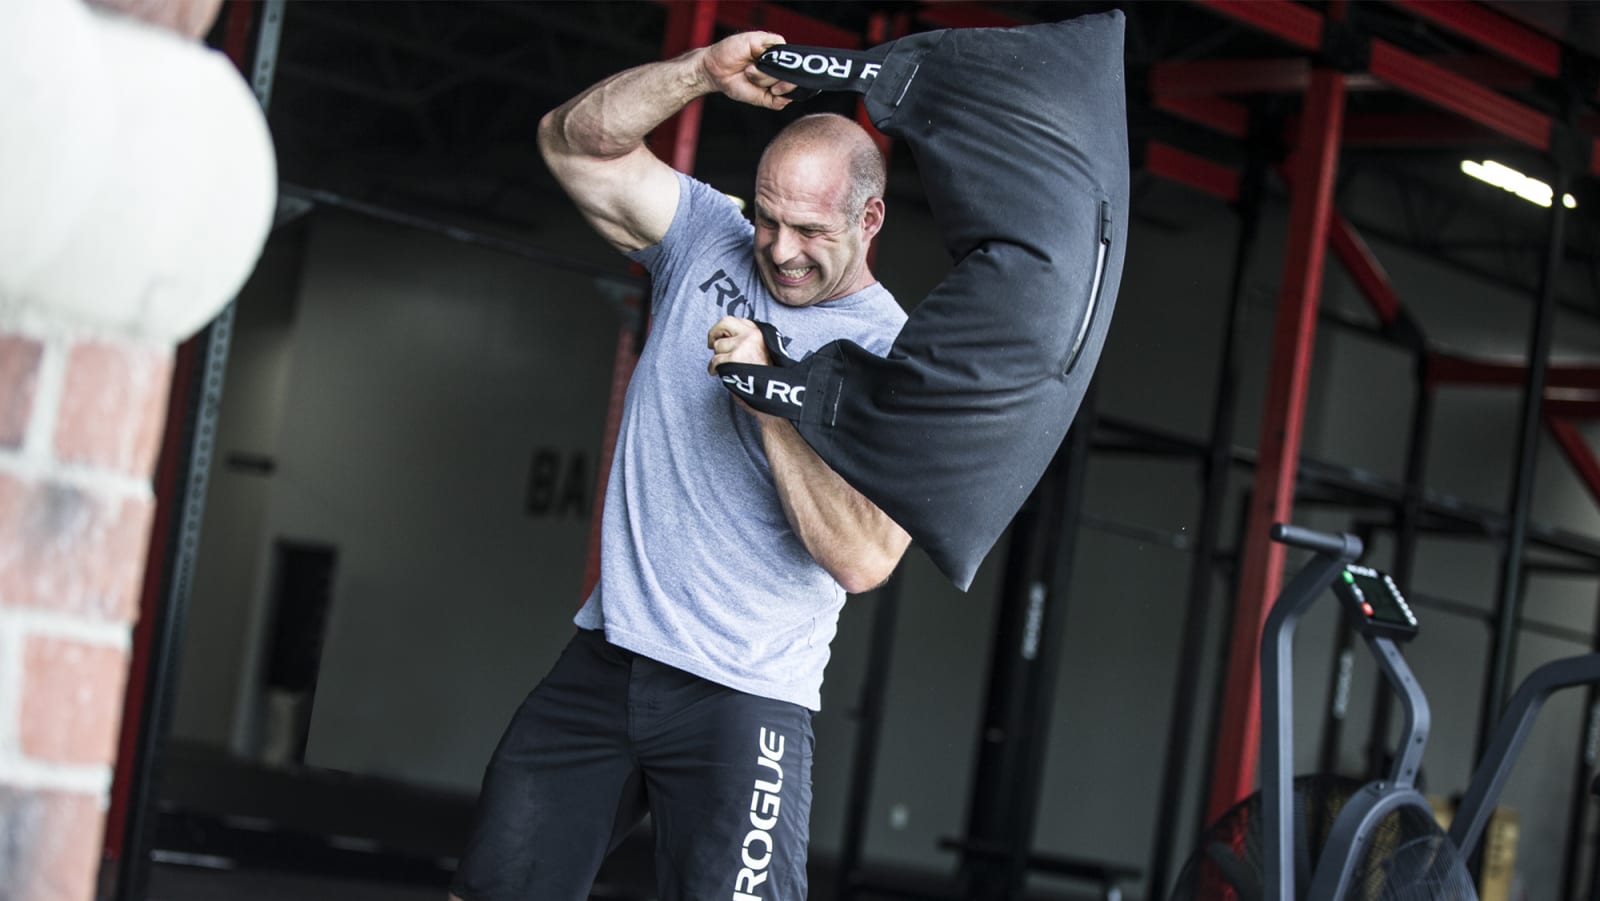 Crossfit Inspired Bulgarian Bag Workout - Get Back Into Fitness